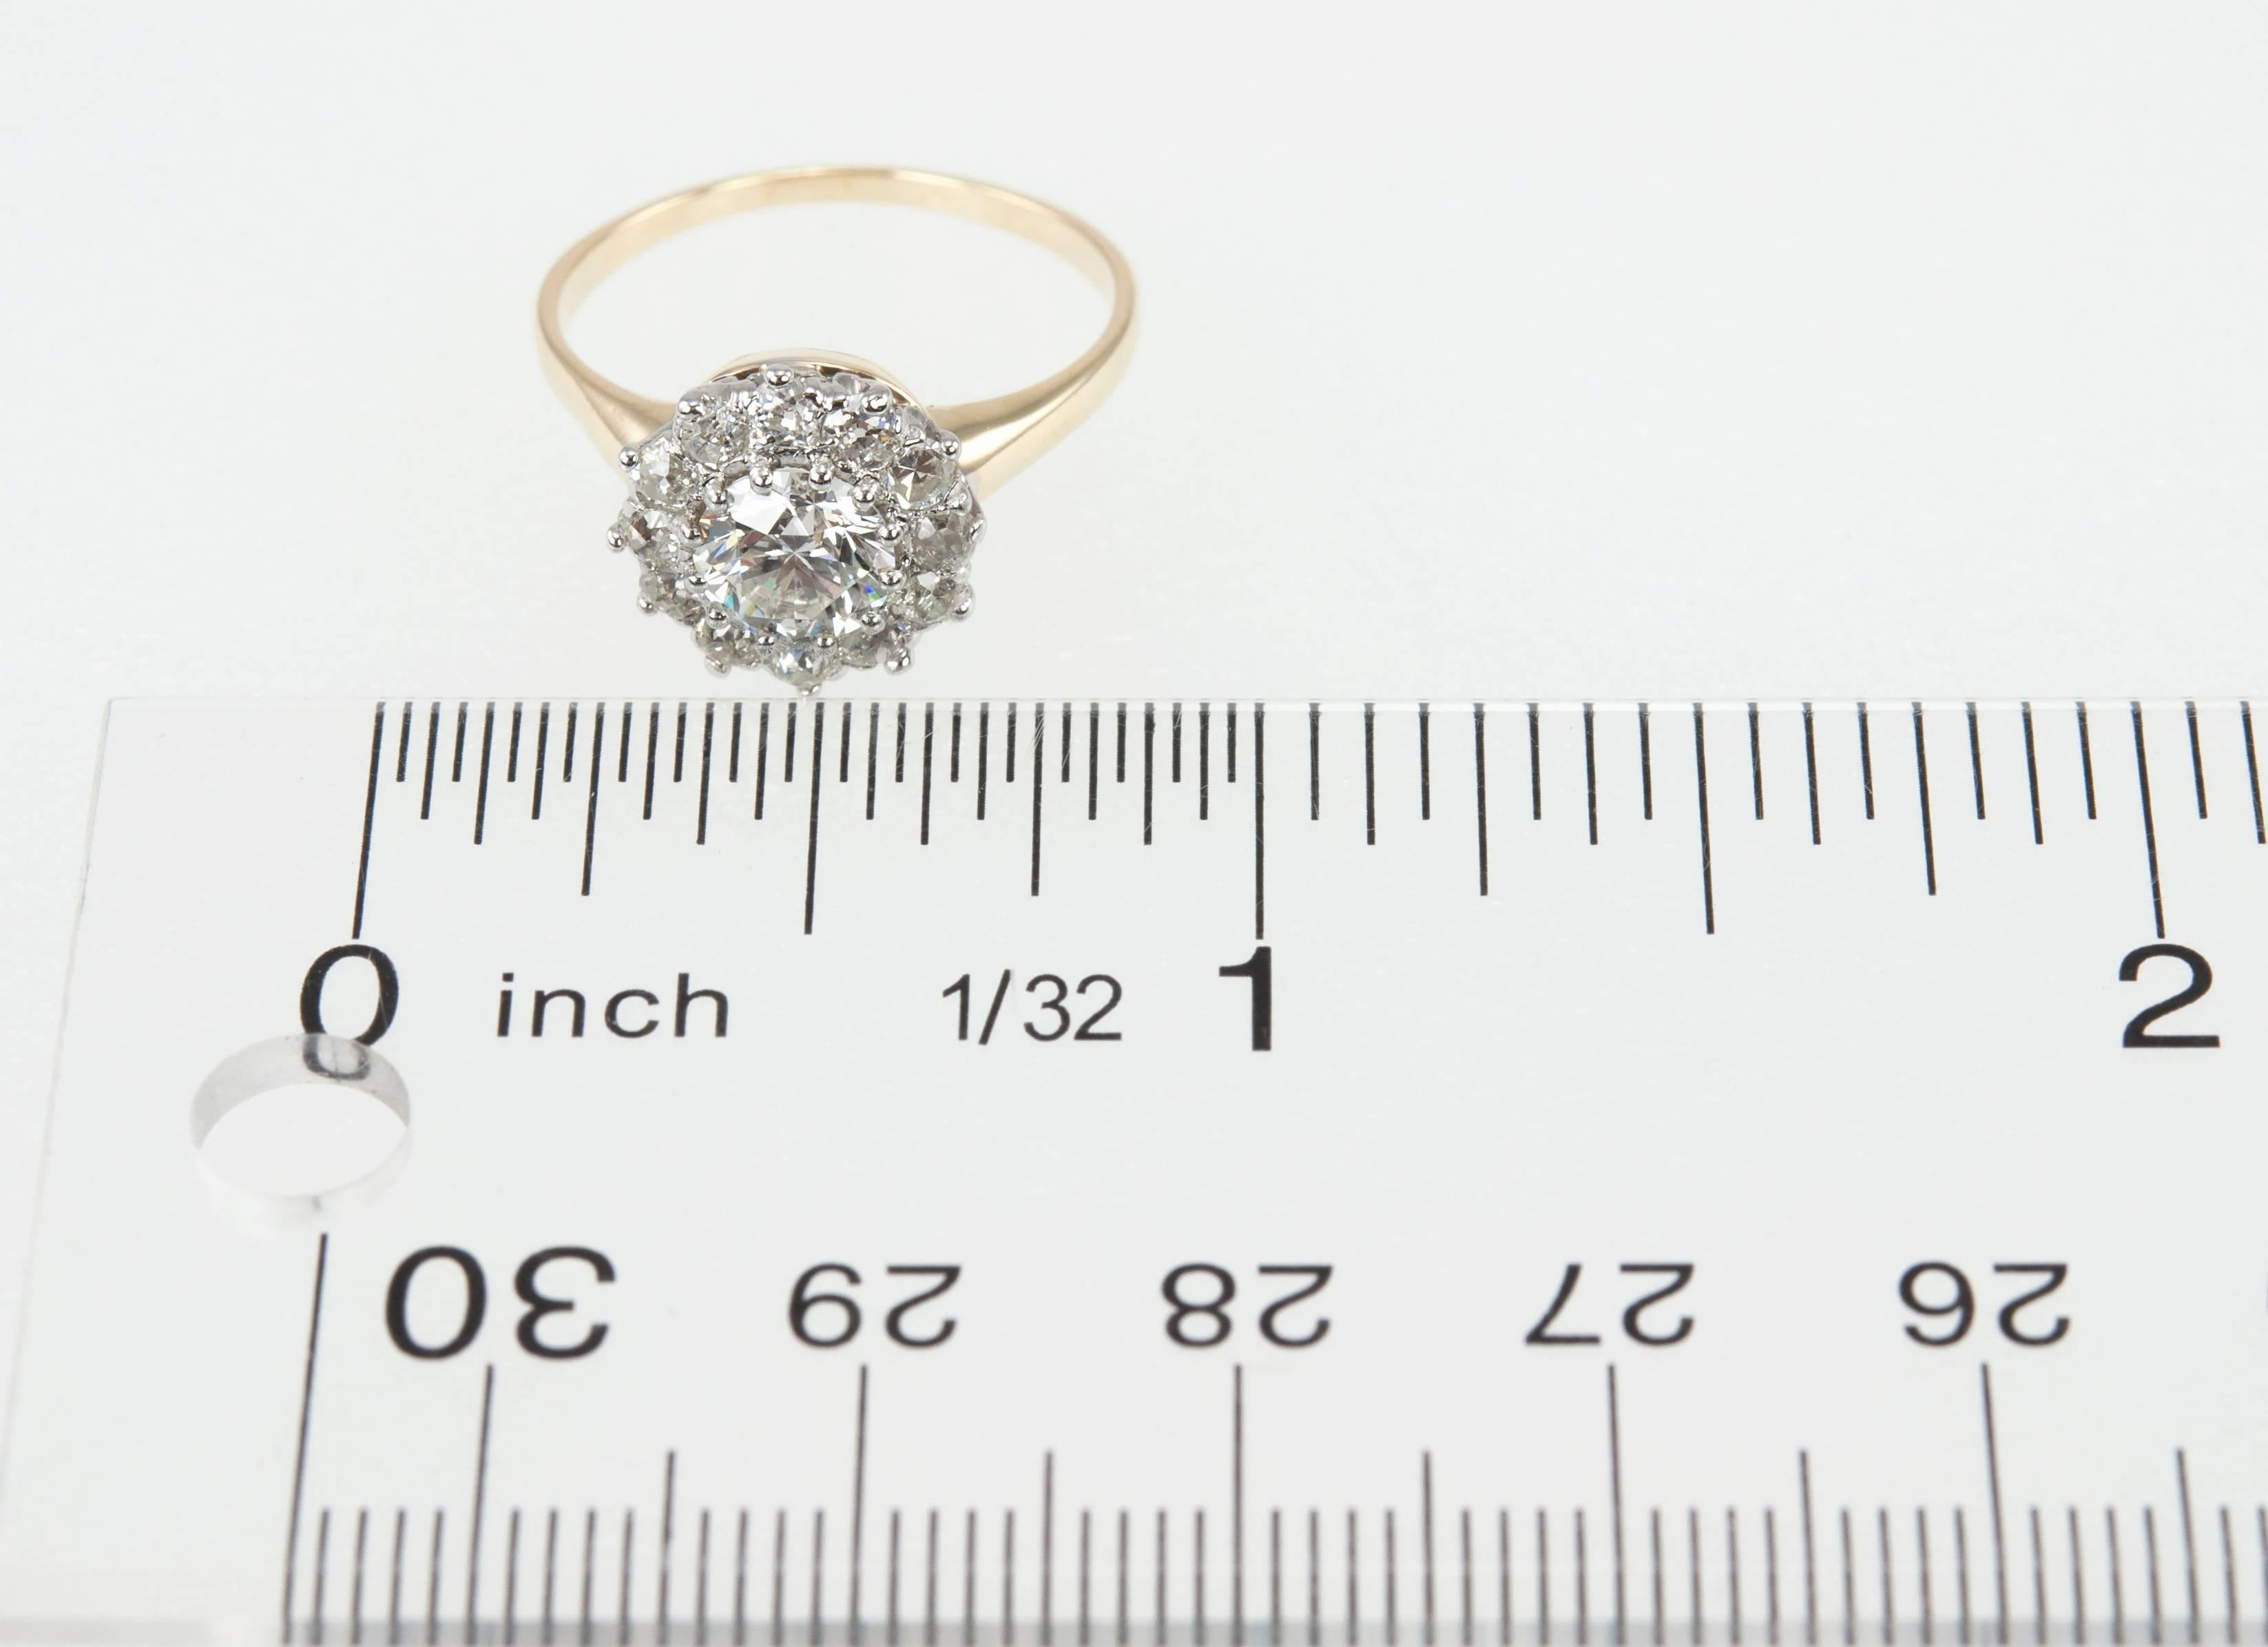 A beautiful, antique diamond cluster ring in platinum topped 14 karat yellow gold. The center diamond is 0.76 carats, E in color and VVS2 in clarity (per EGL certificate).  Surround the center diamond are 12 Old European Cut diamonds, approximately